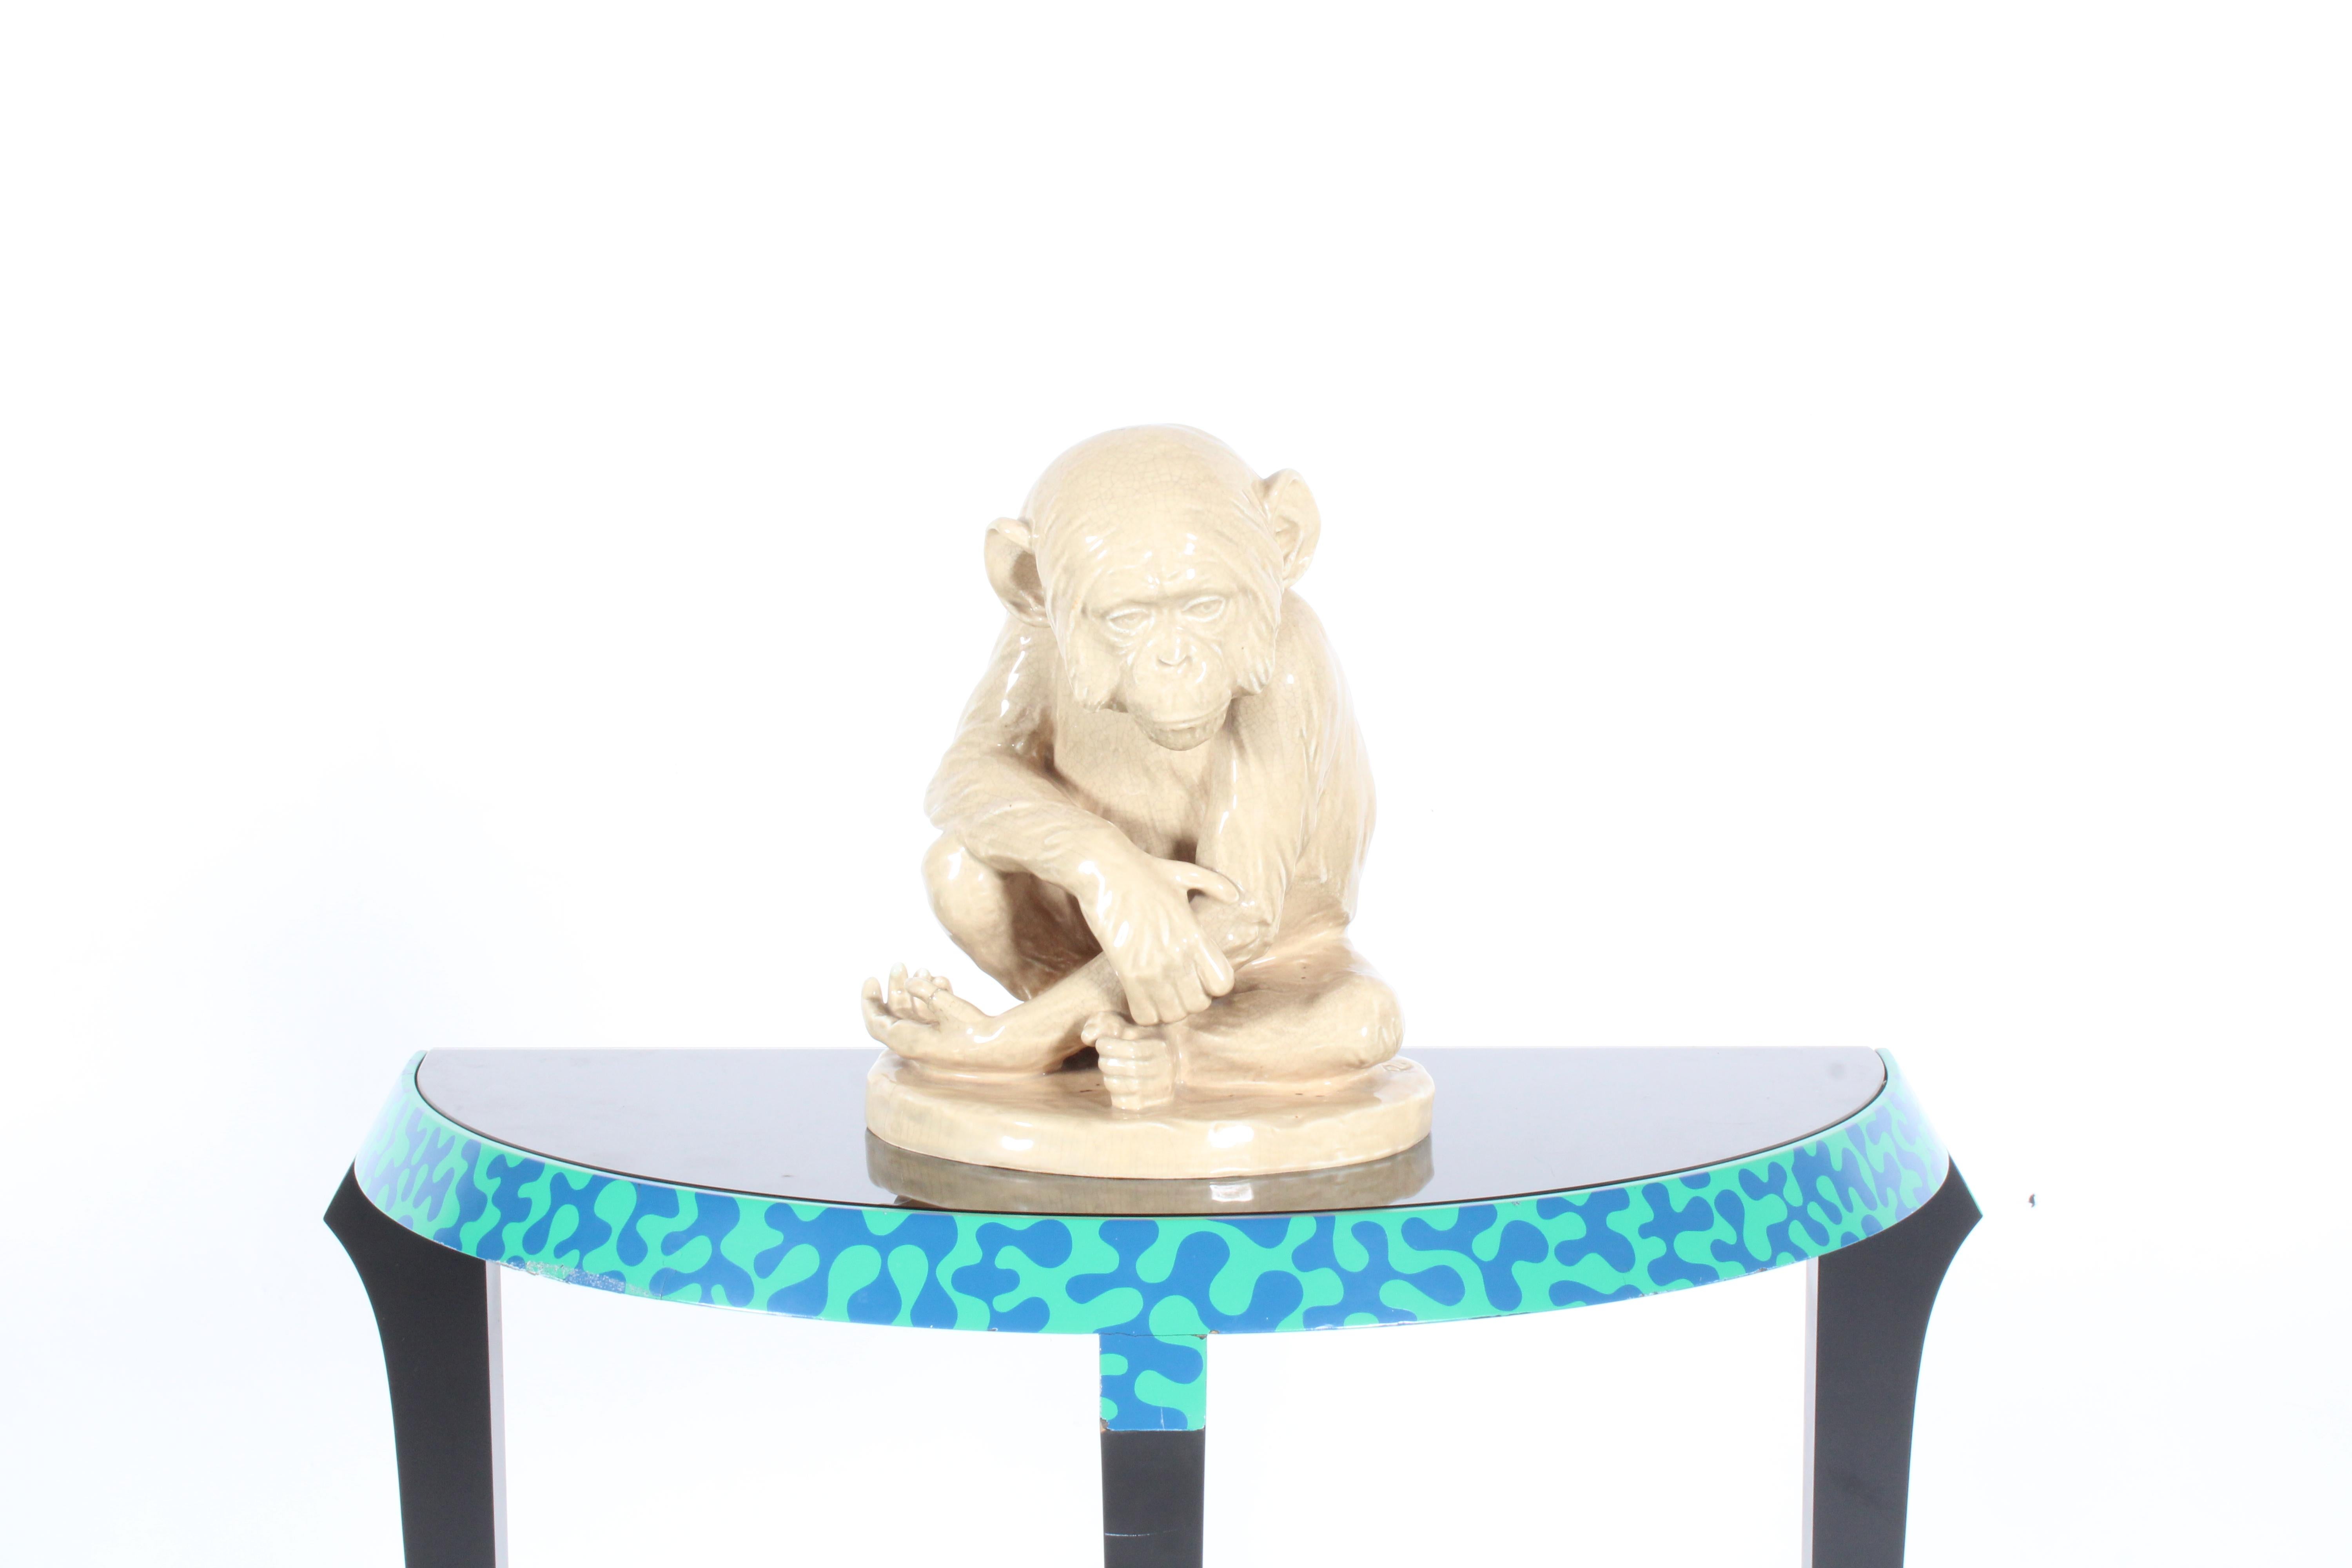 German Charming Vintage Ceramic In The Form Of A Chimpanzee  *Free Worldwide Shipping